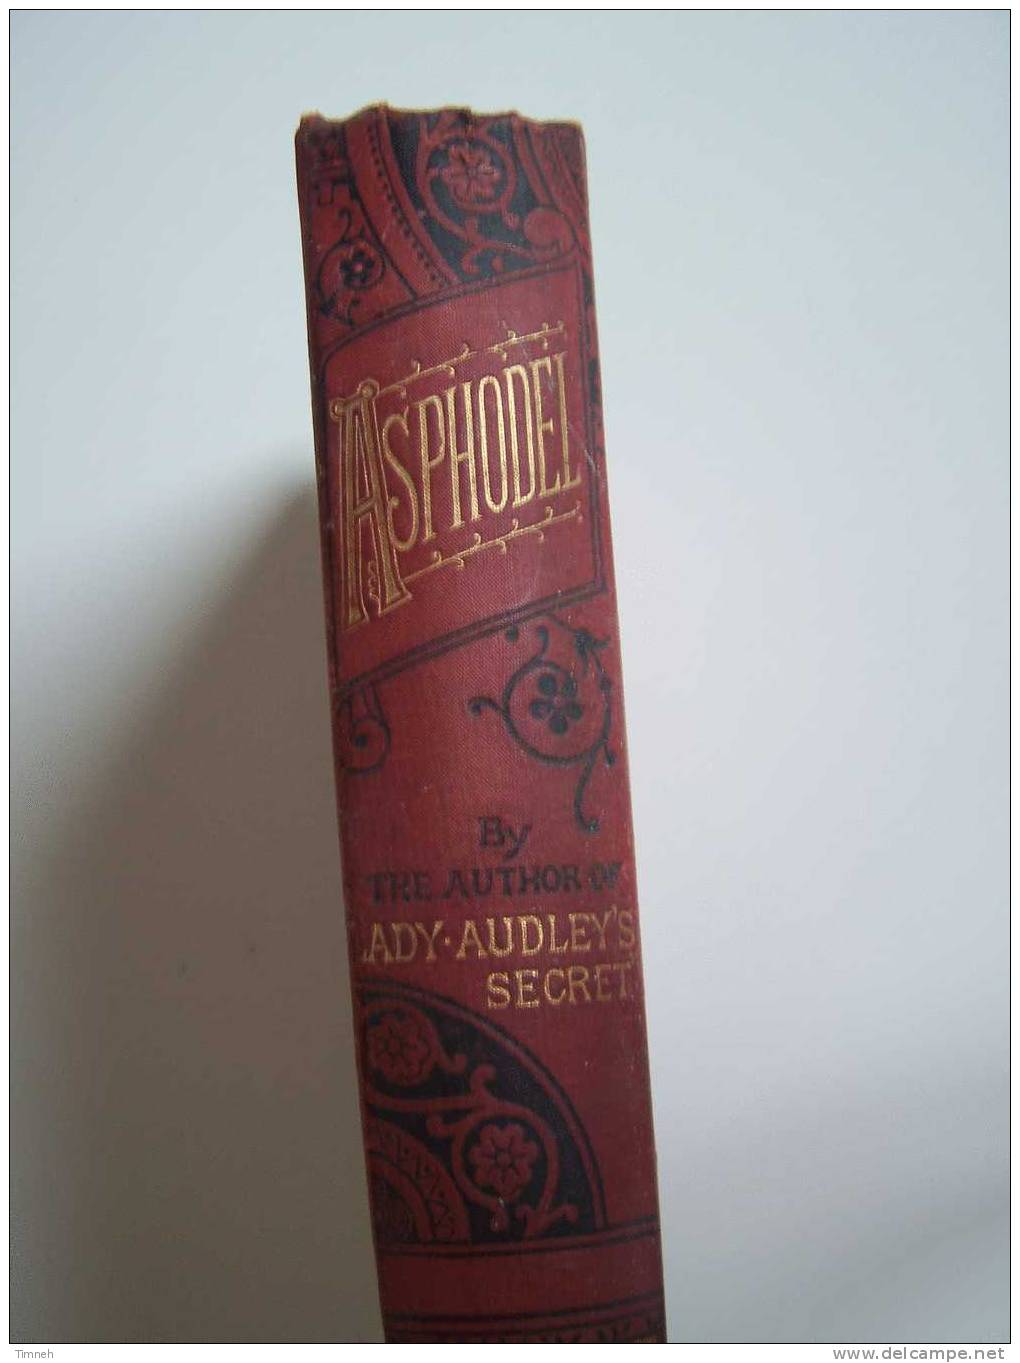 ASPHODEL--a Novel By The Author Of Lady AUDLEY'S SECRET-J§R MAXWELL- - 1900-1949